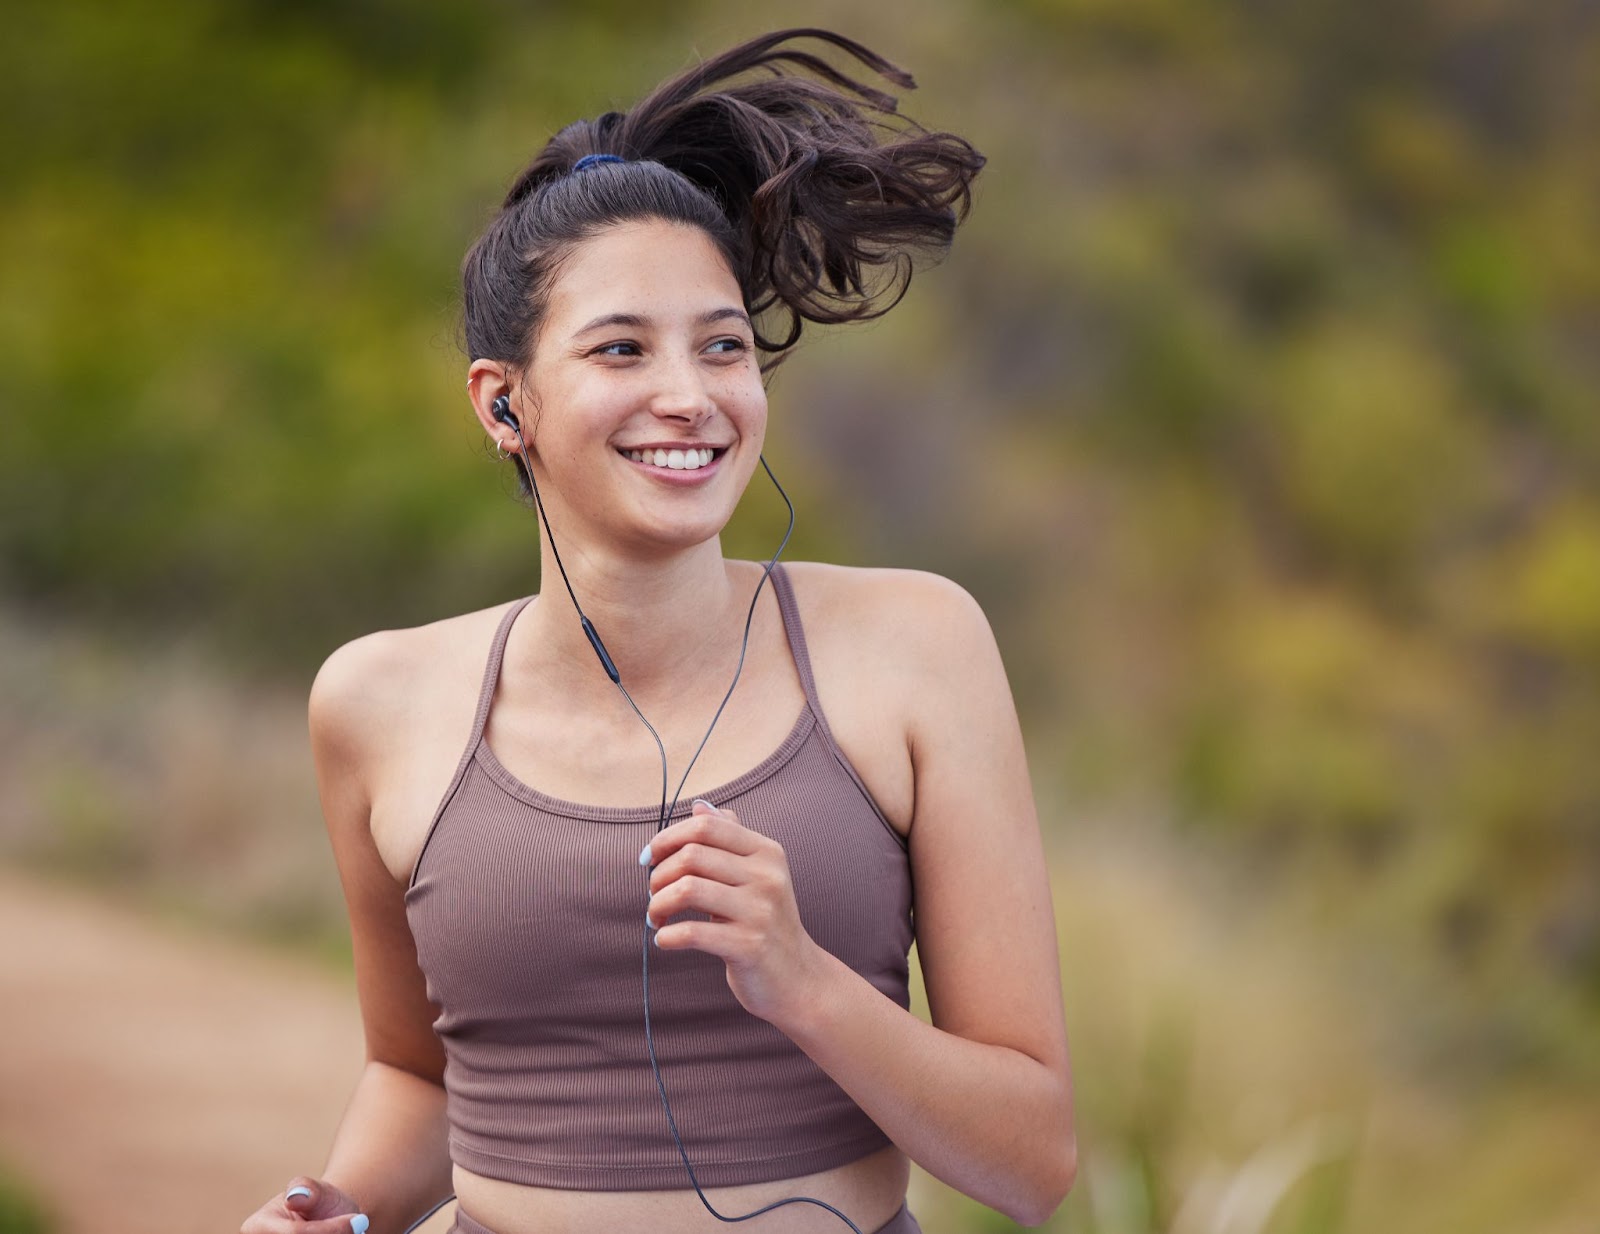 Young fit woman going for a long run outdoors